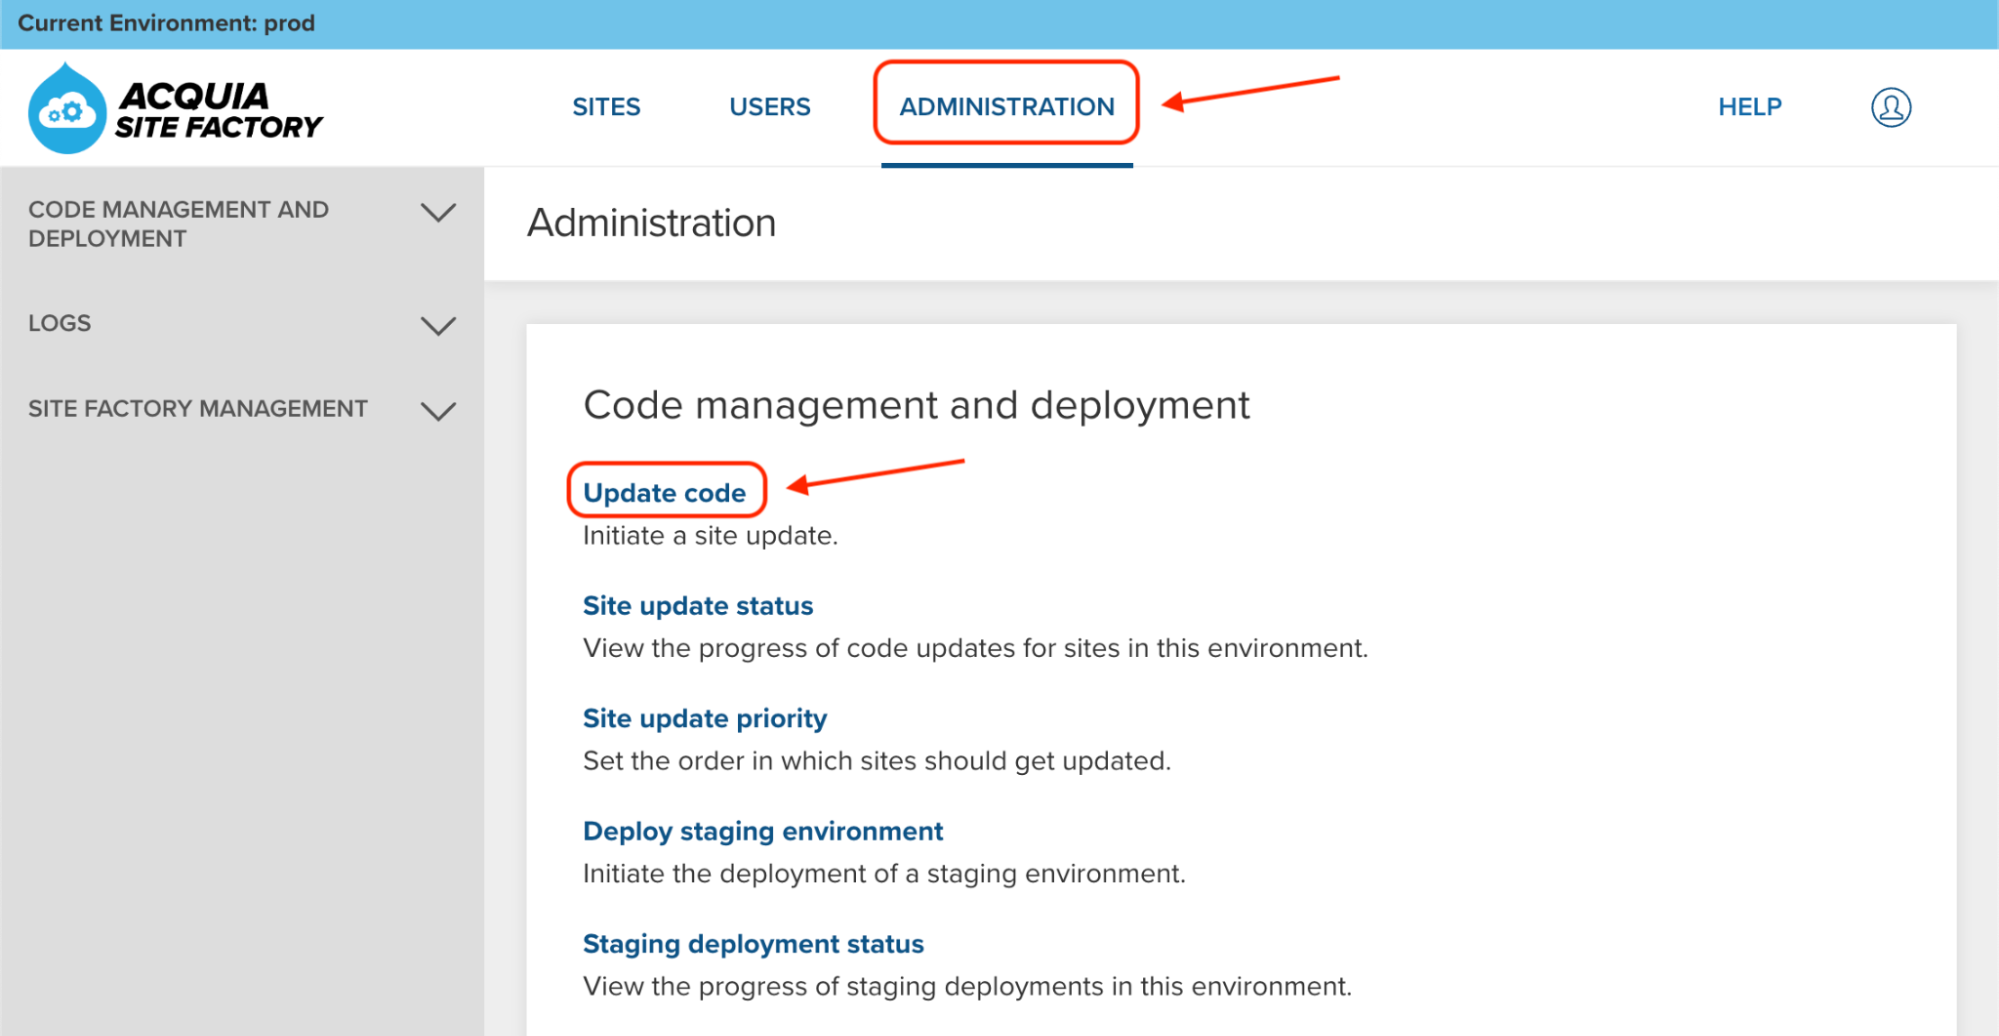 Login to the ACSF Console UI of your prod environment and go to Administration and Update code.